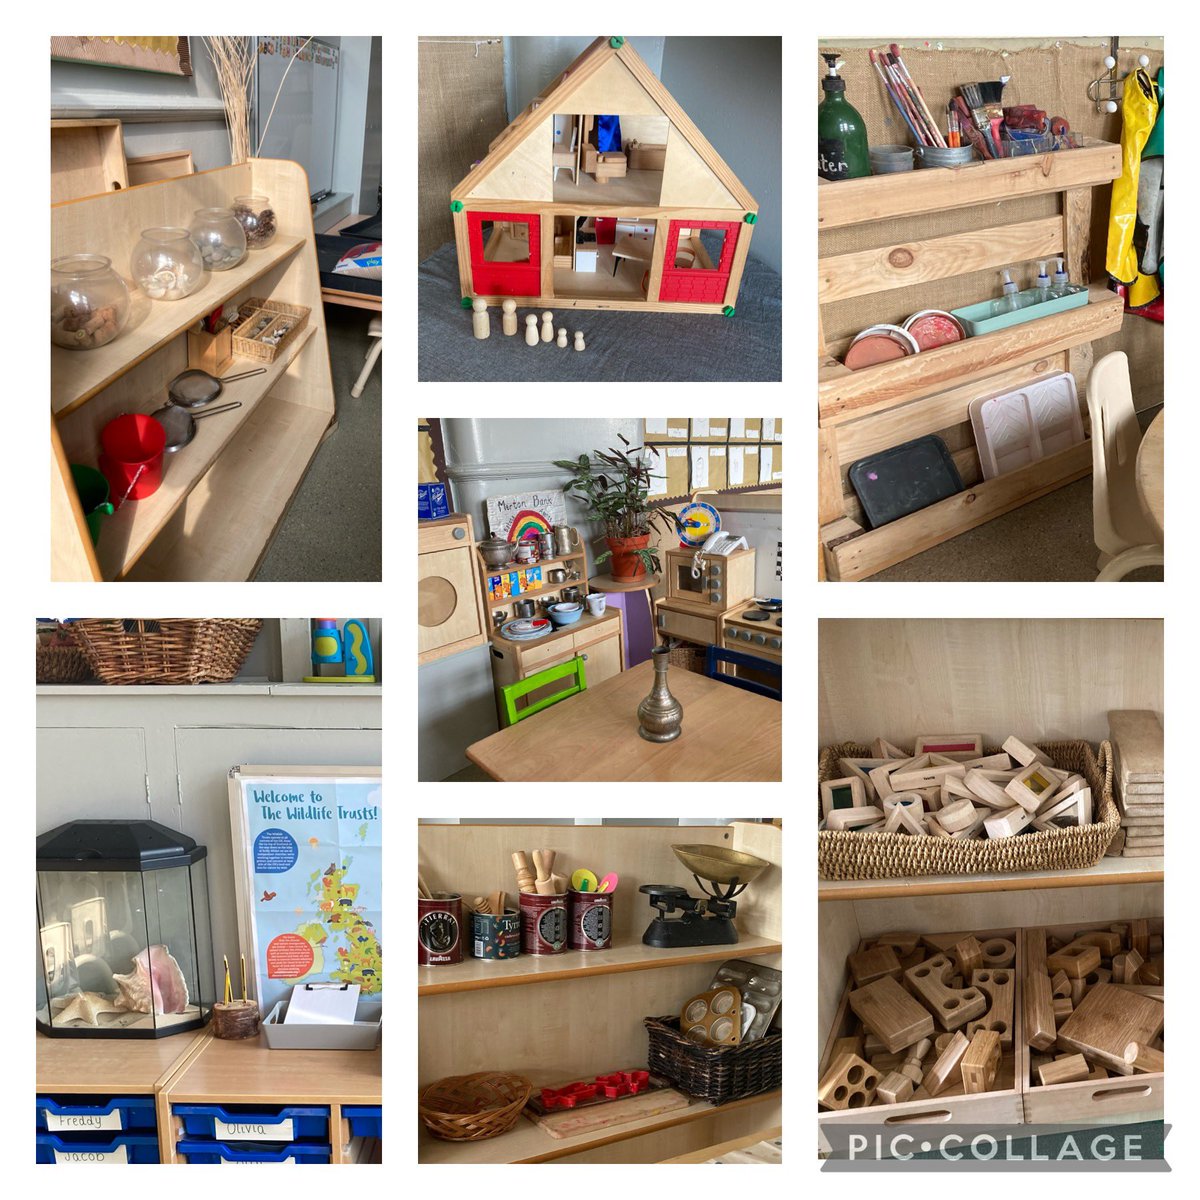 We are so excited for all our new Little Learners @MertonBankP to discover our learning spaces and make them their own next week! #nurturingaloveforlearning #earlyyears #eytalking #discover #curiousity #startingschool @ABCDoes @canigoandplay